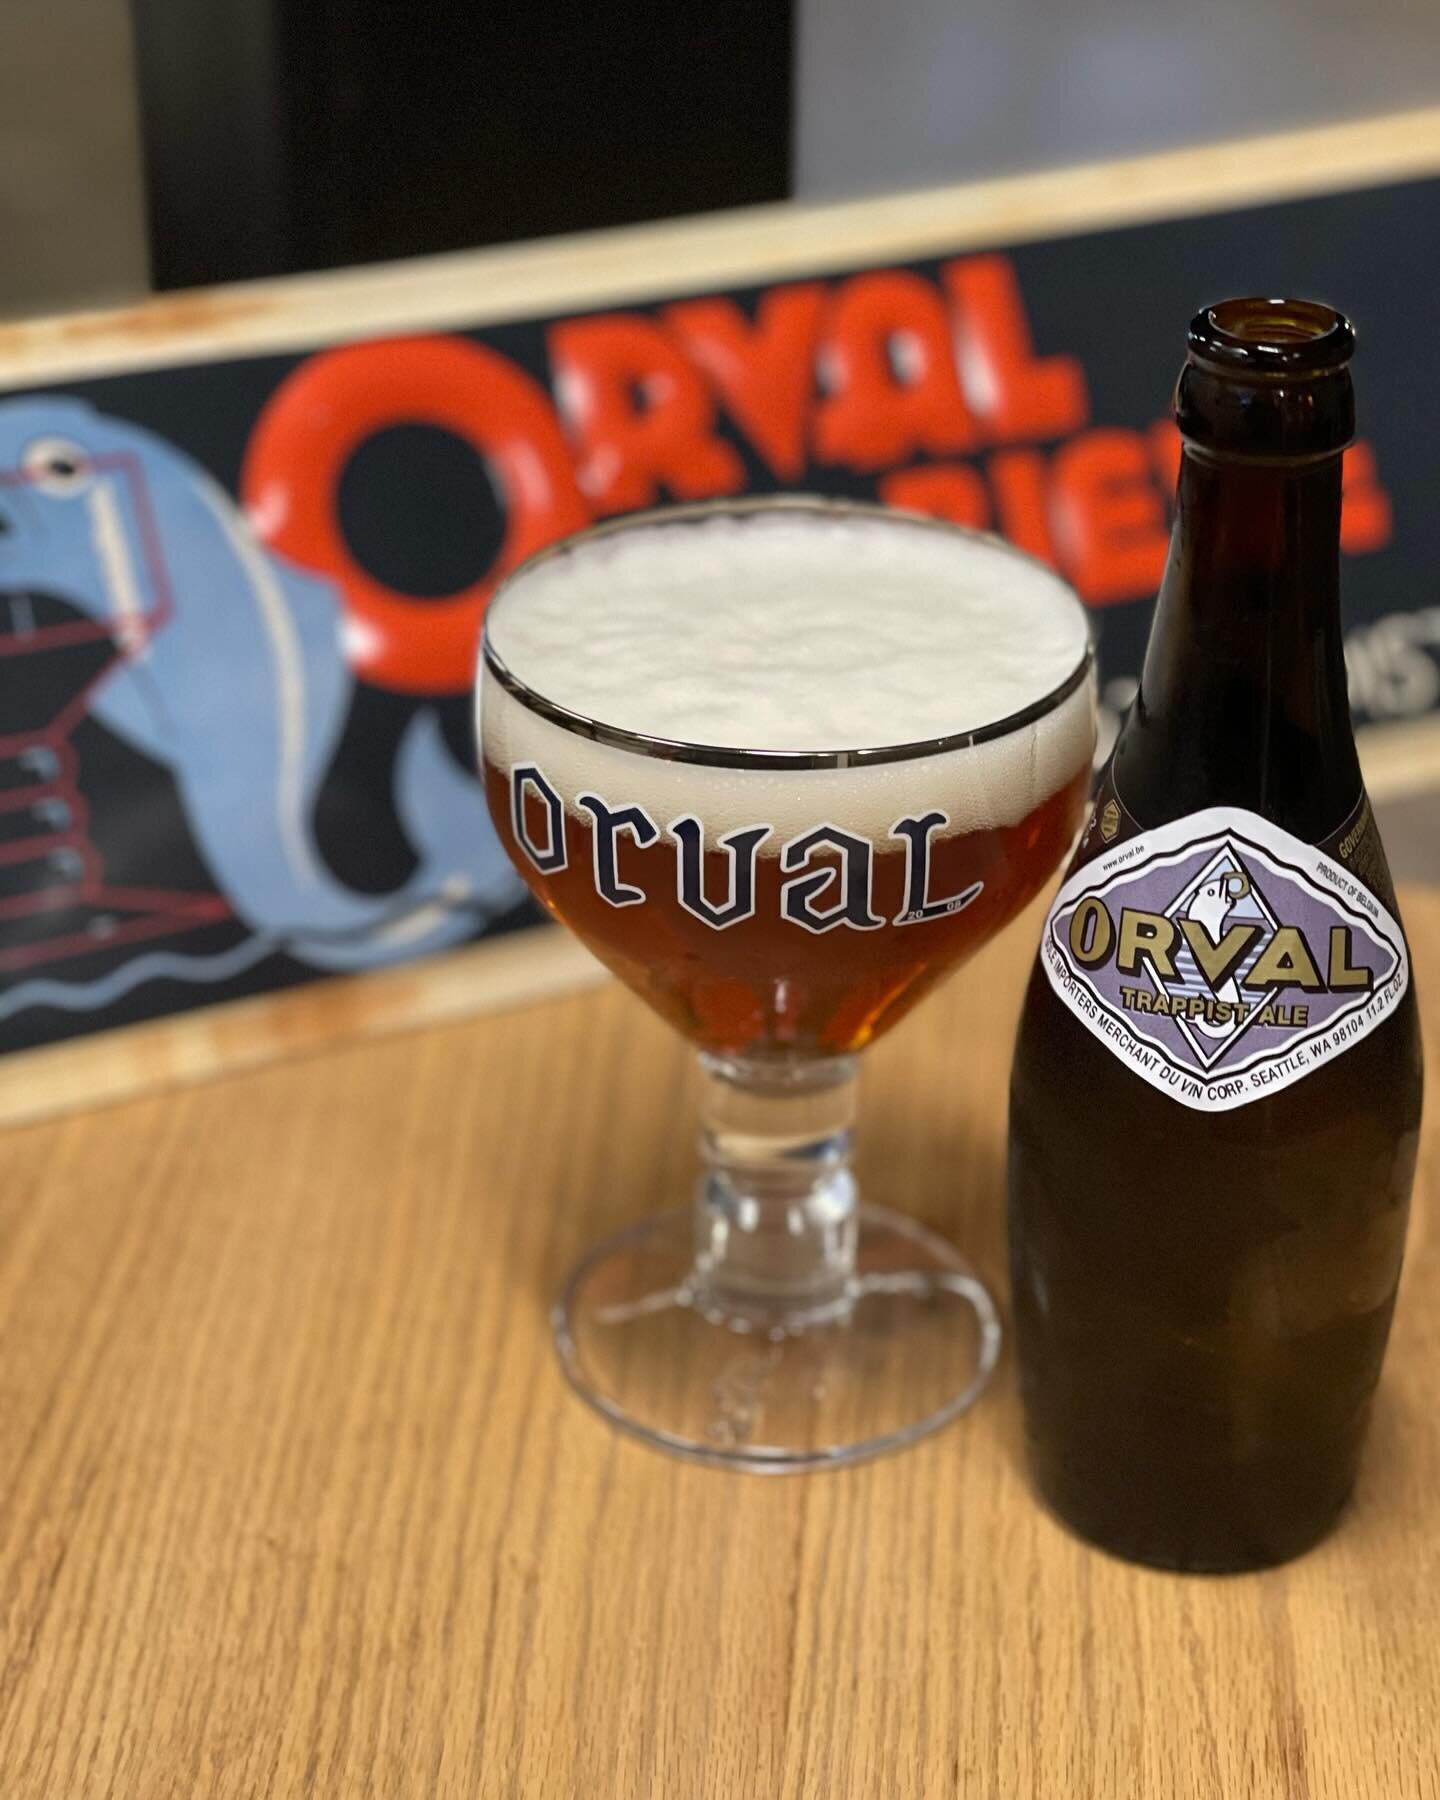 It&rsquo;s #internationalorvalday and you know we have ya covered. 

If you&rsquo;ve never had it, it&rsquo;s a lovely 6.9% Belgian Pale Ale that&rsquo;s dry hopped and finished with Brettanomyces (a strain of &lsquo;wild&rsquo; yeast that lends addi